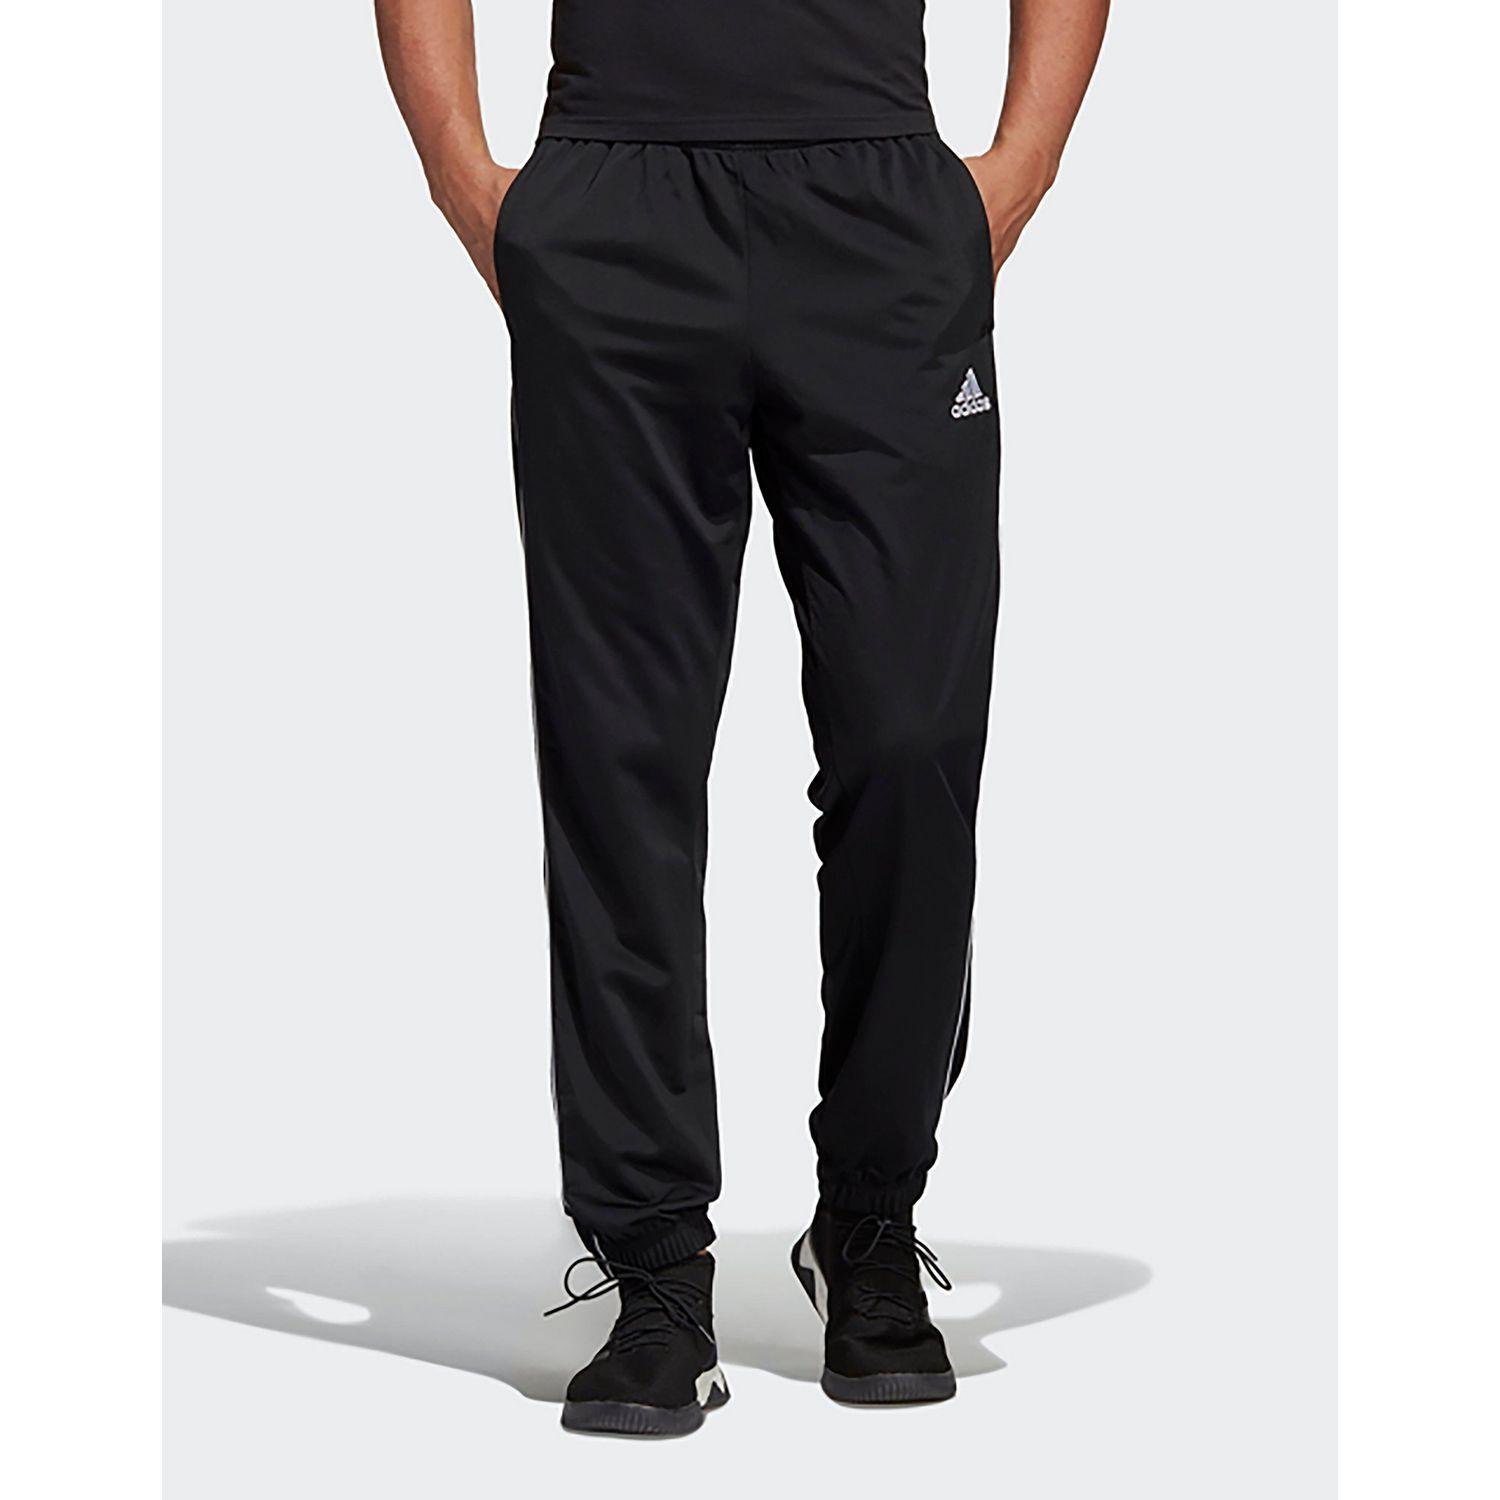 adidas Originals Core 18 Tracksuit Bottoms in Black / White (Black) for ...